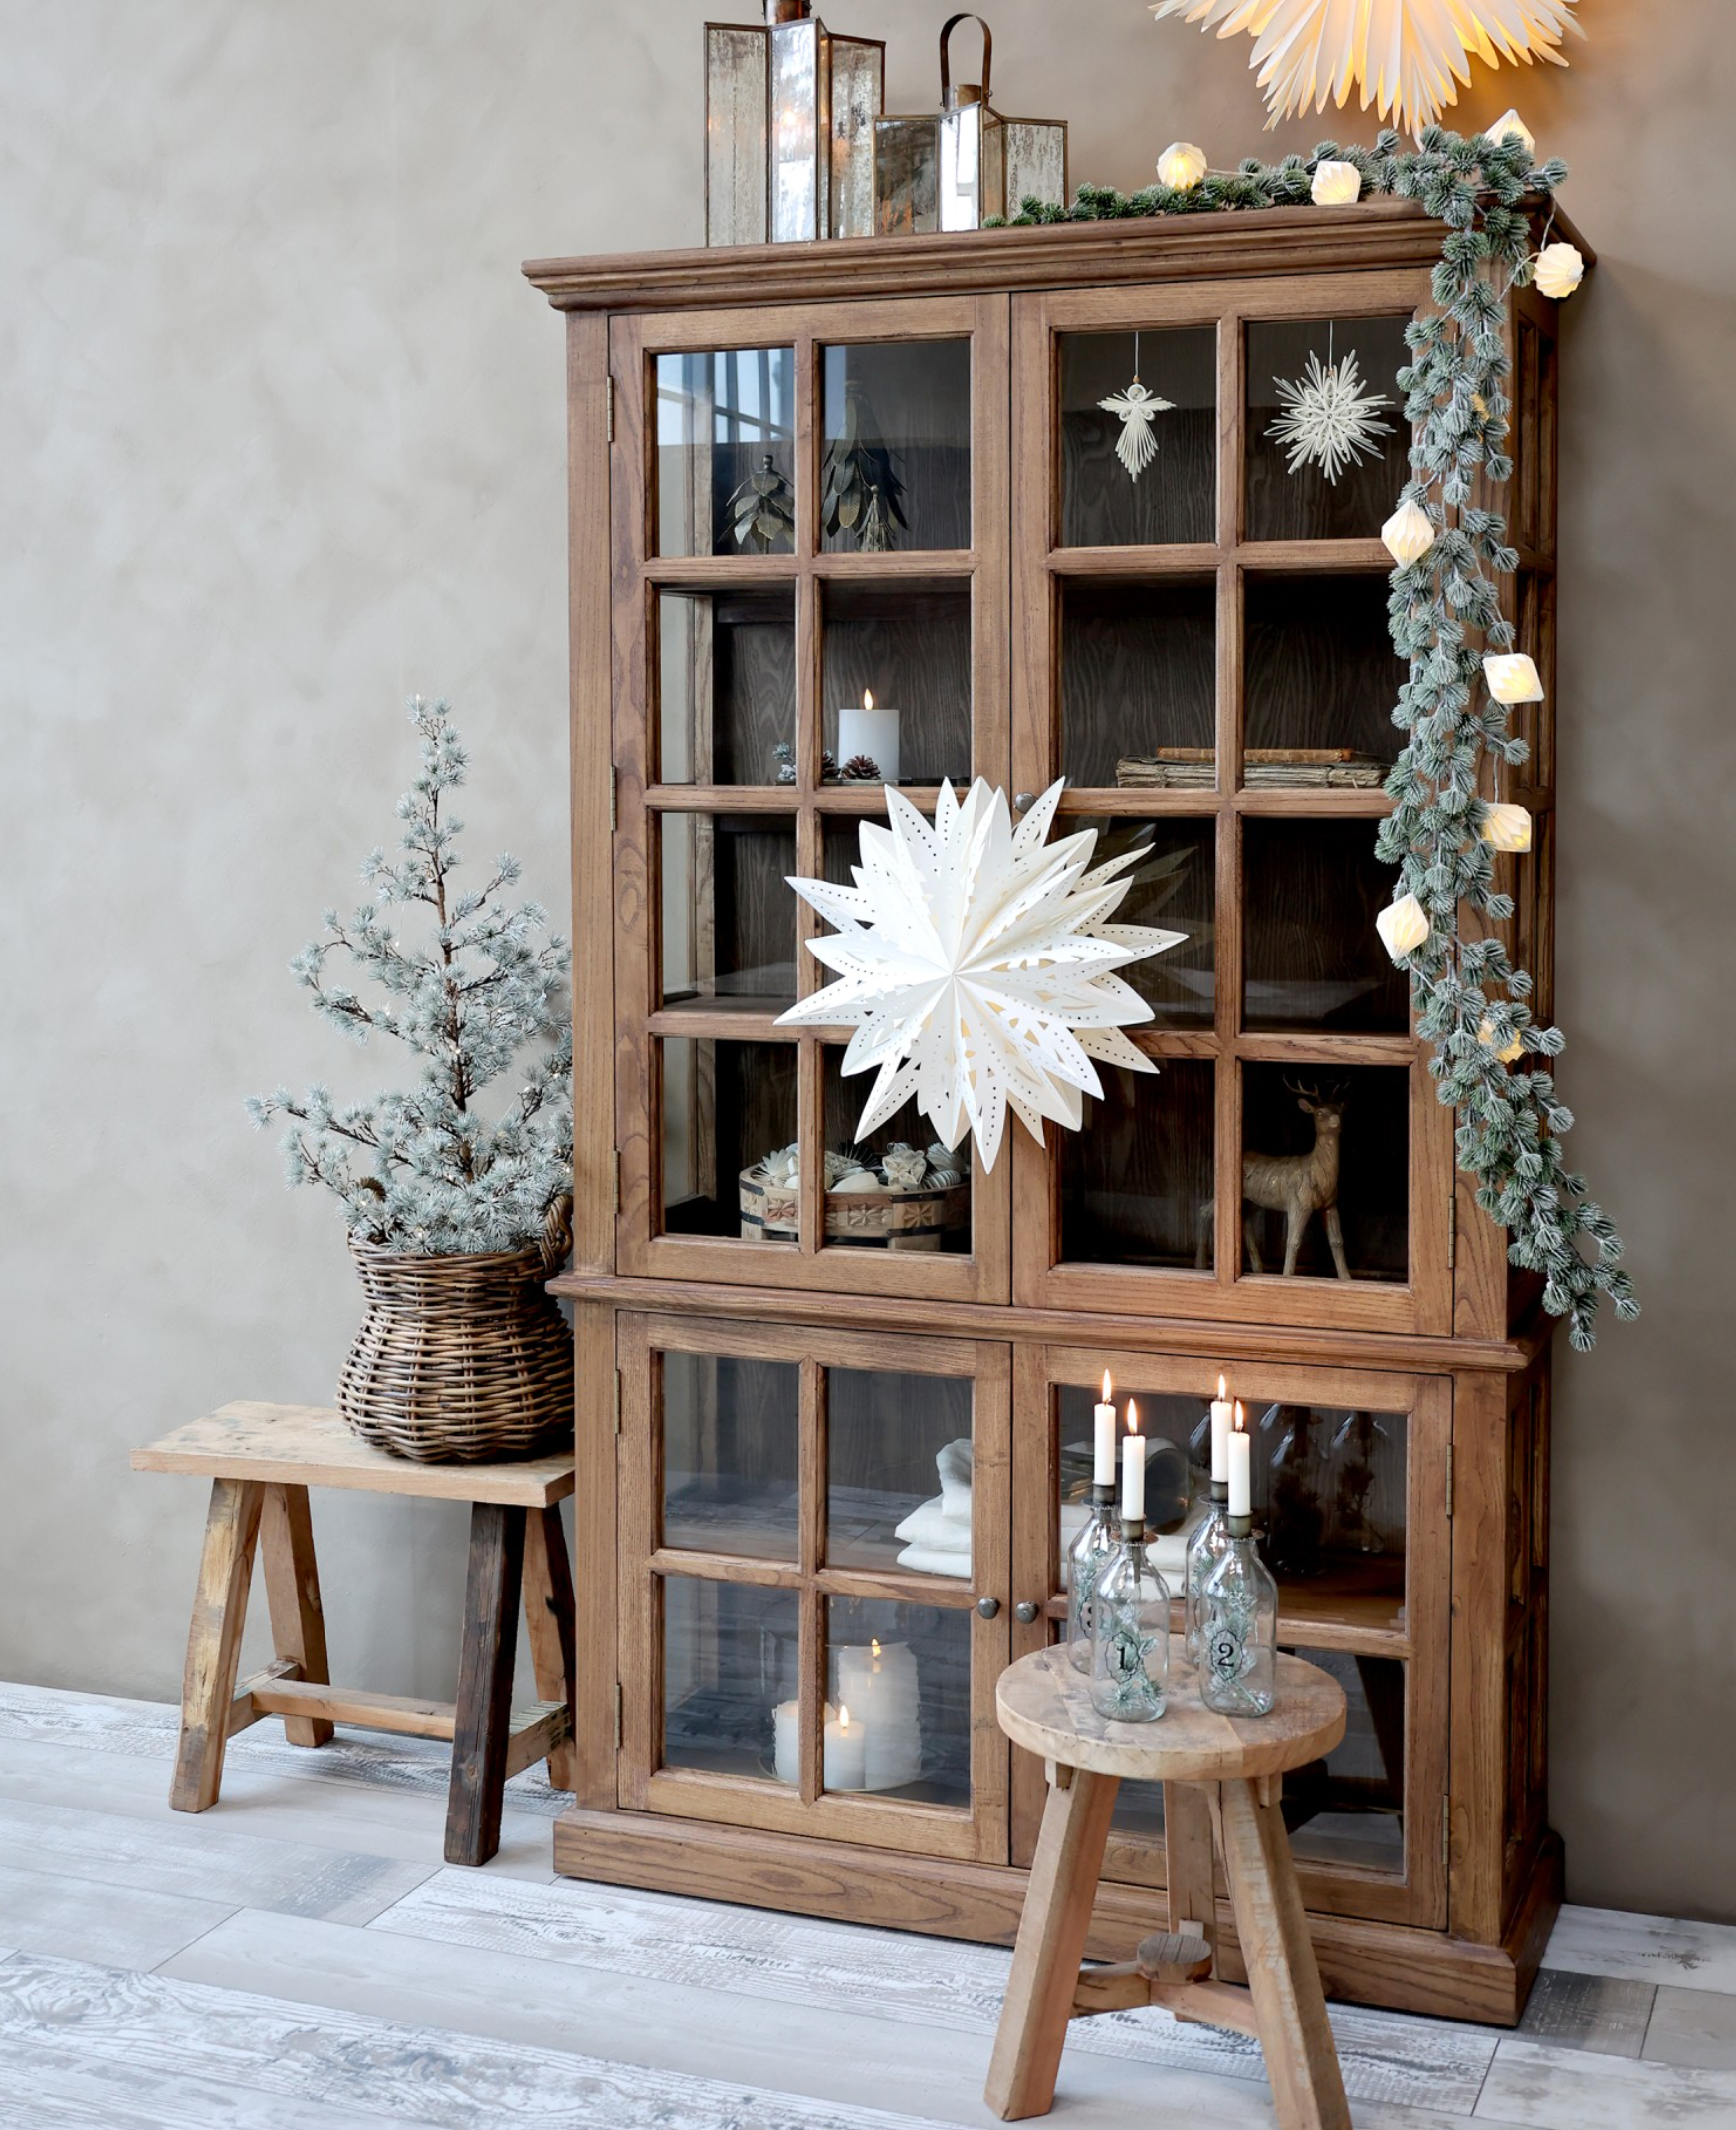 a natural wood toned armoire decorated for Christmas.